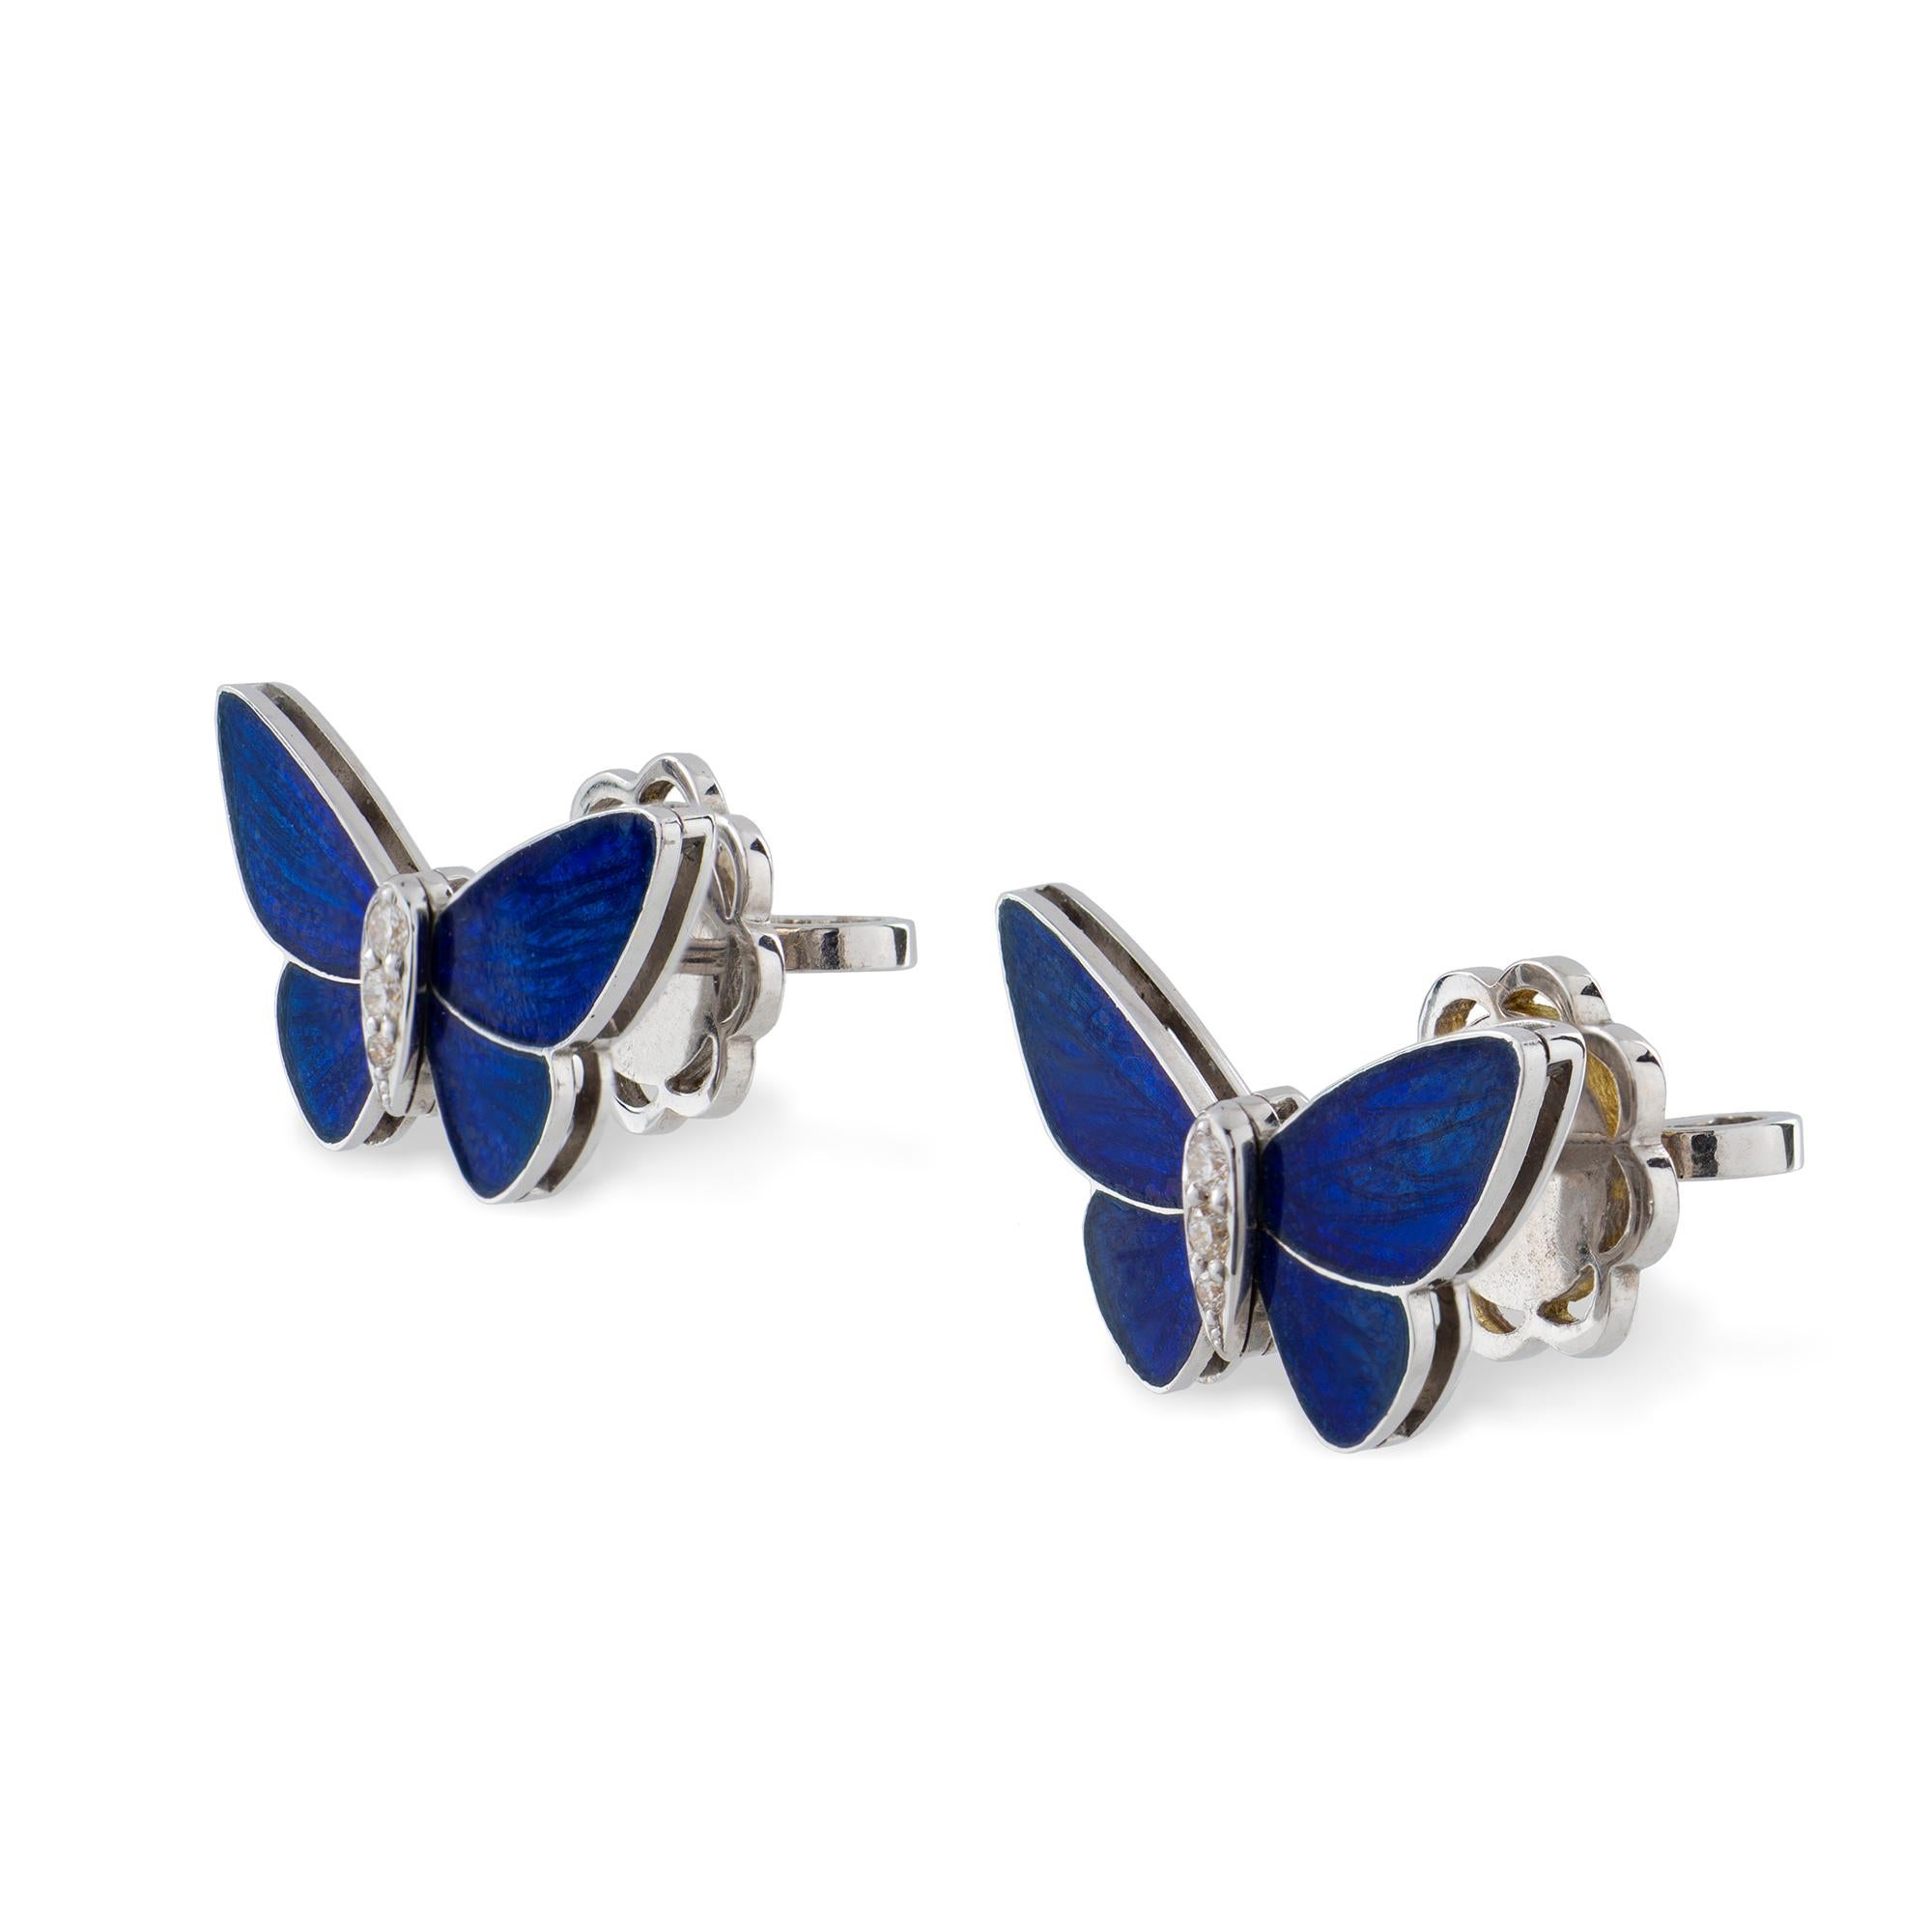 A pair of midnight-blue butterfly stud earrings by Ilgiz F, each butterfly with champlevé blue enamelled wings and diamond encrusted bodies, mounted in white gold with post and scroll fittings, made by Ilgiz Fazulzyanov, hallmarked 18ct gold, London